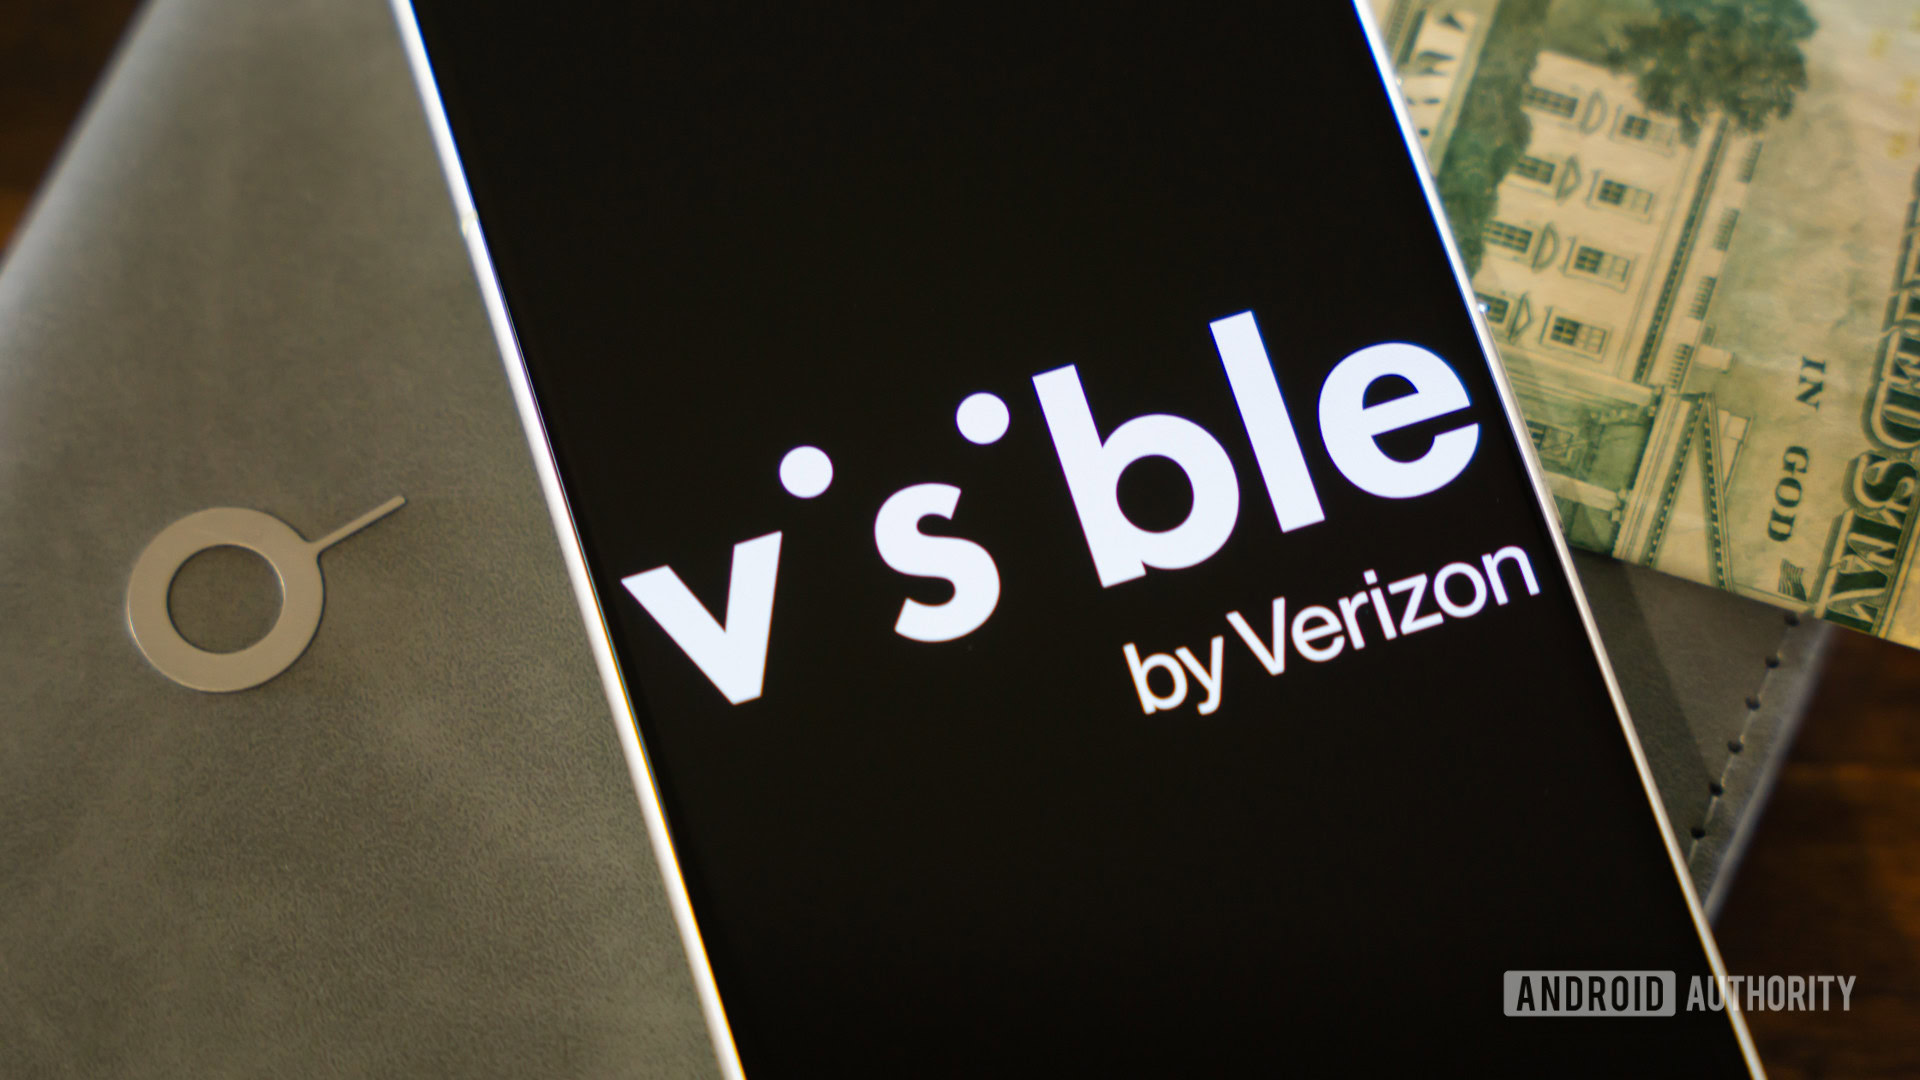 Visible by Verizon logo on smartphone, next to money and SIM ejector tool (3)